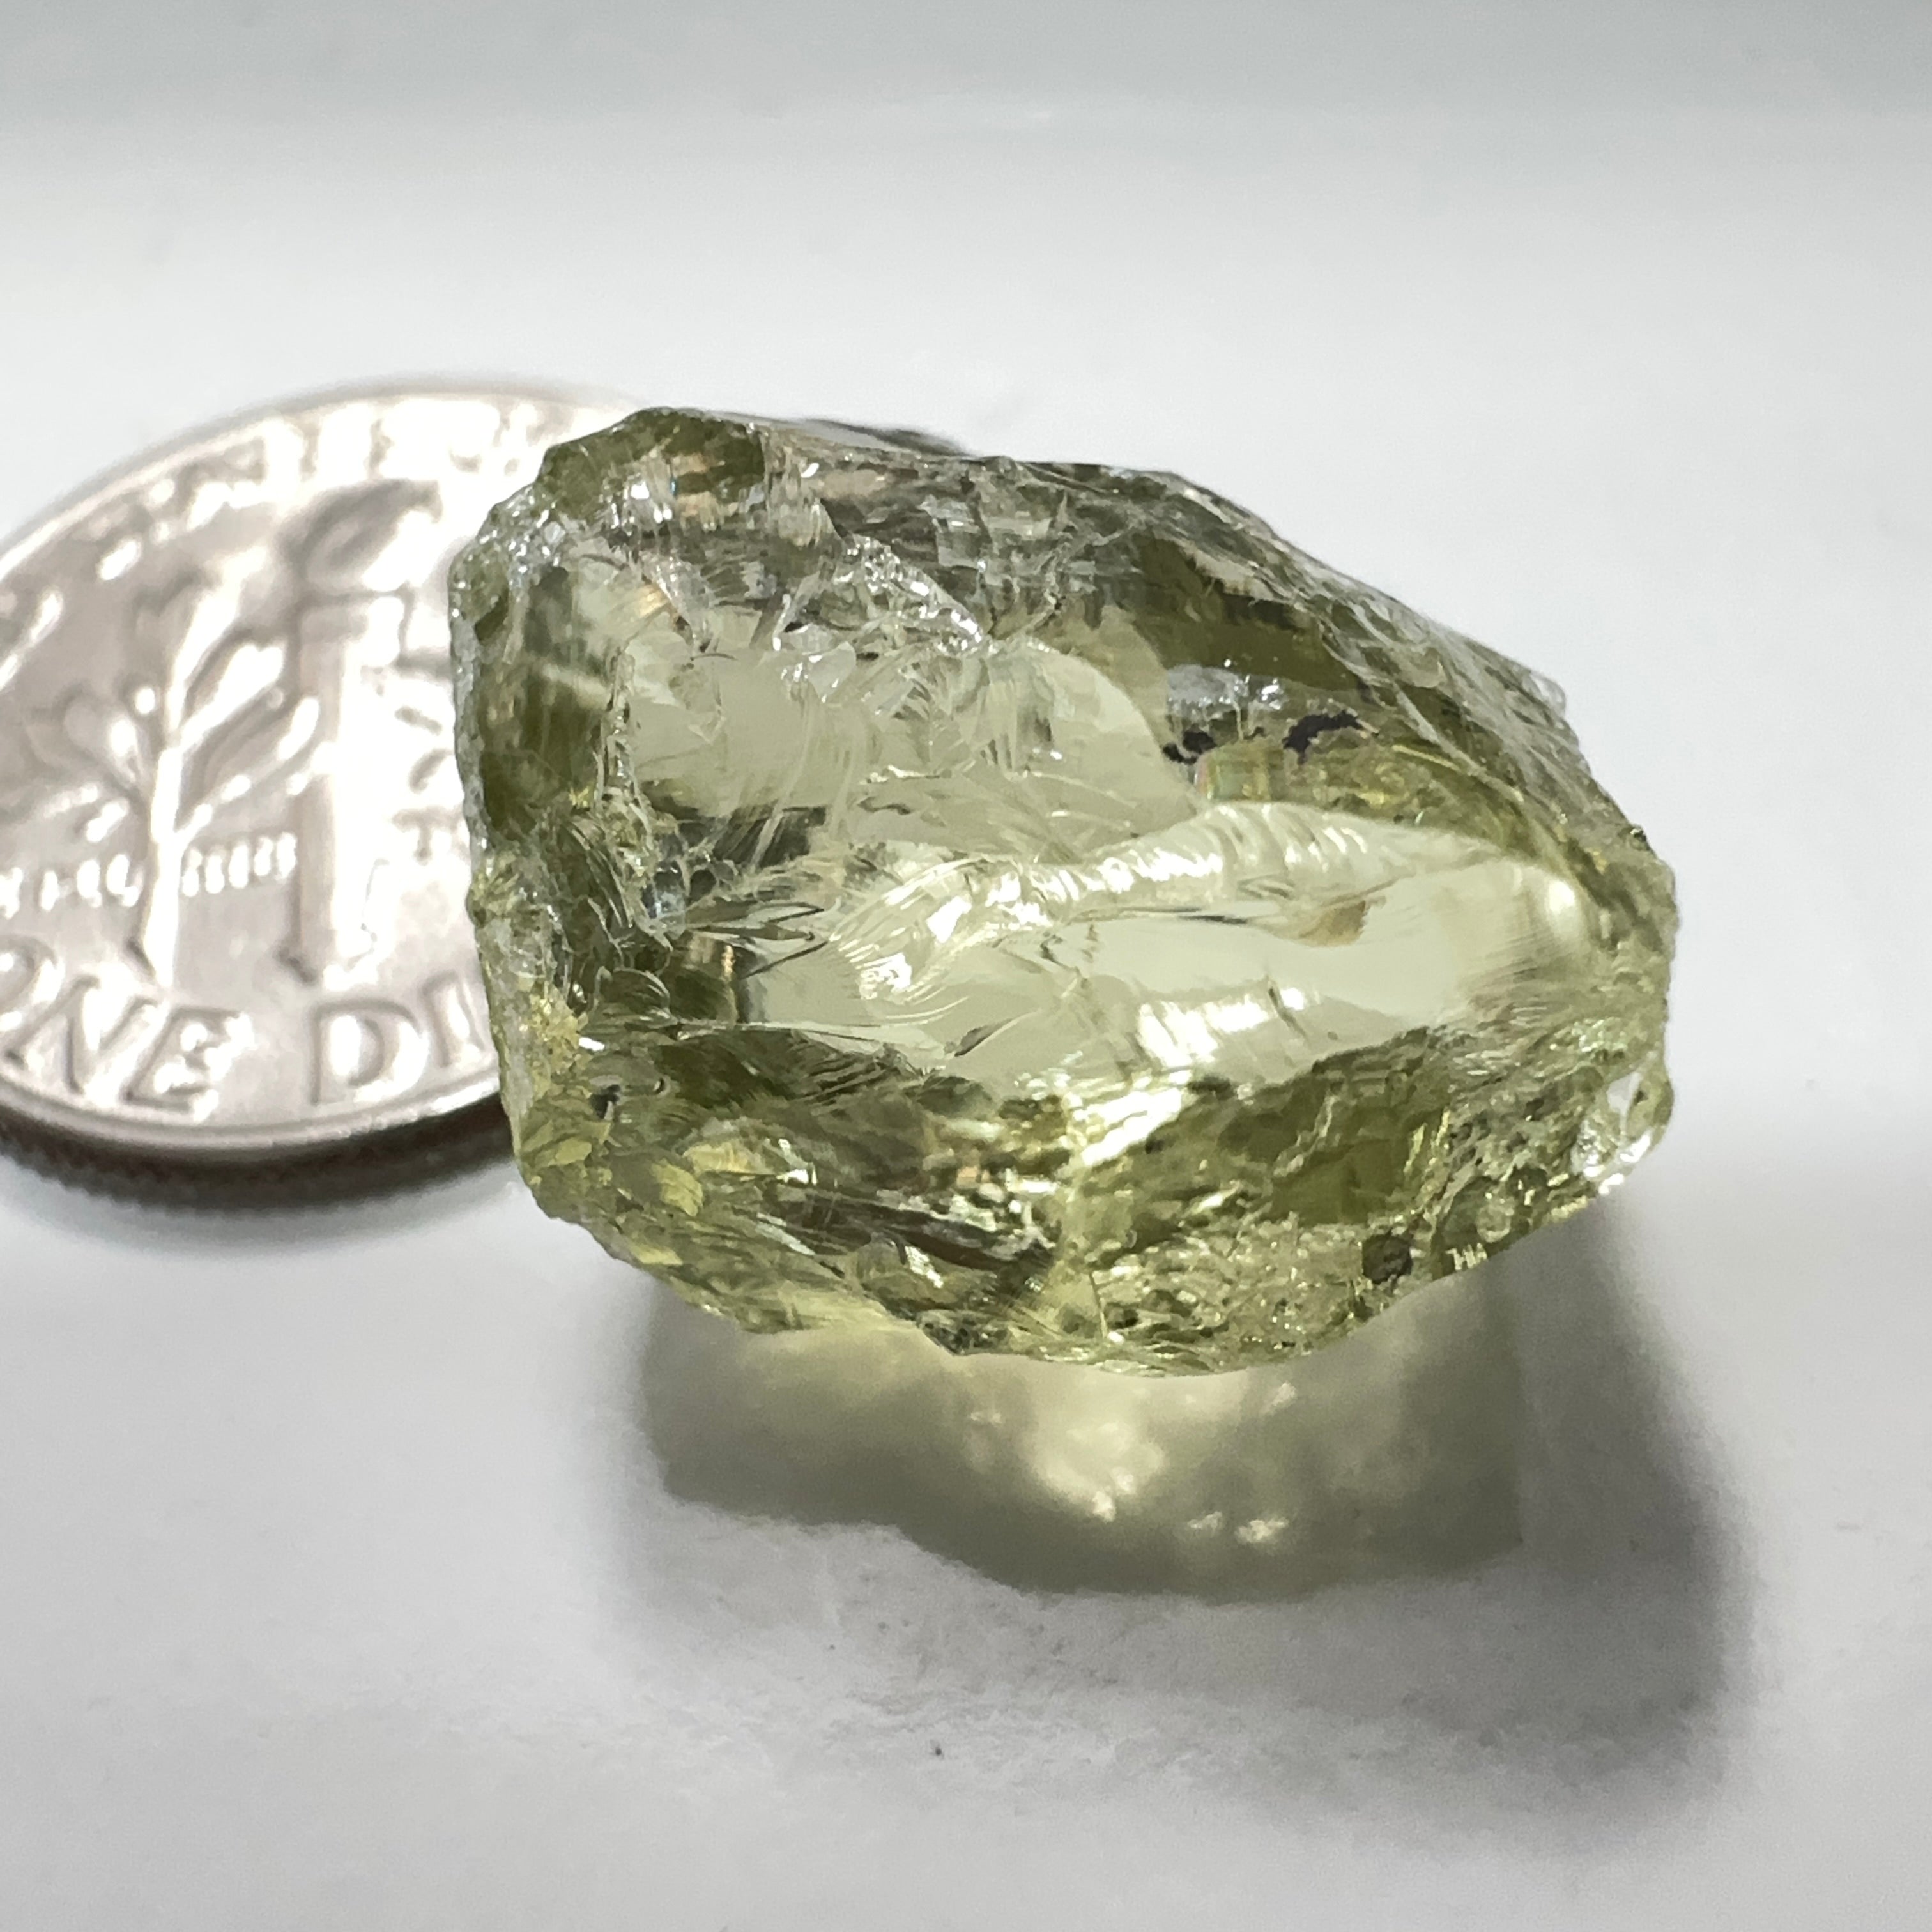 13.15ct Unheated Aquamarine, Tanzania, Unheated Untreated, slight inclusion on the outside will take off a quarter of the stone at the tip, rest vvs-if